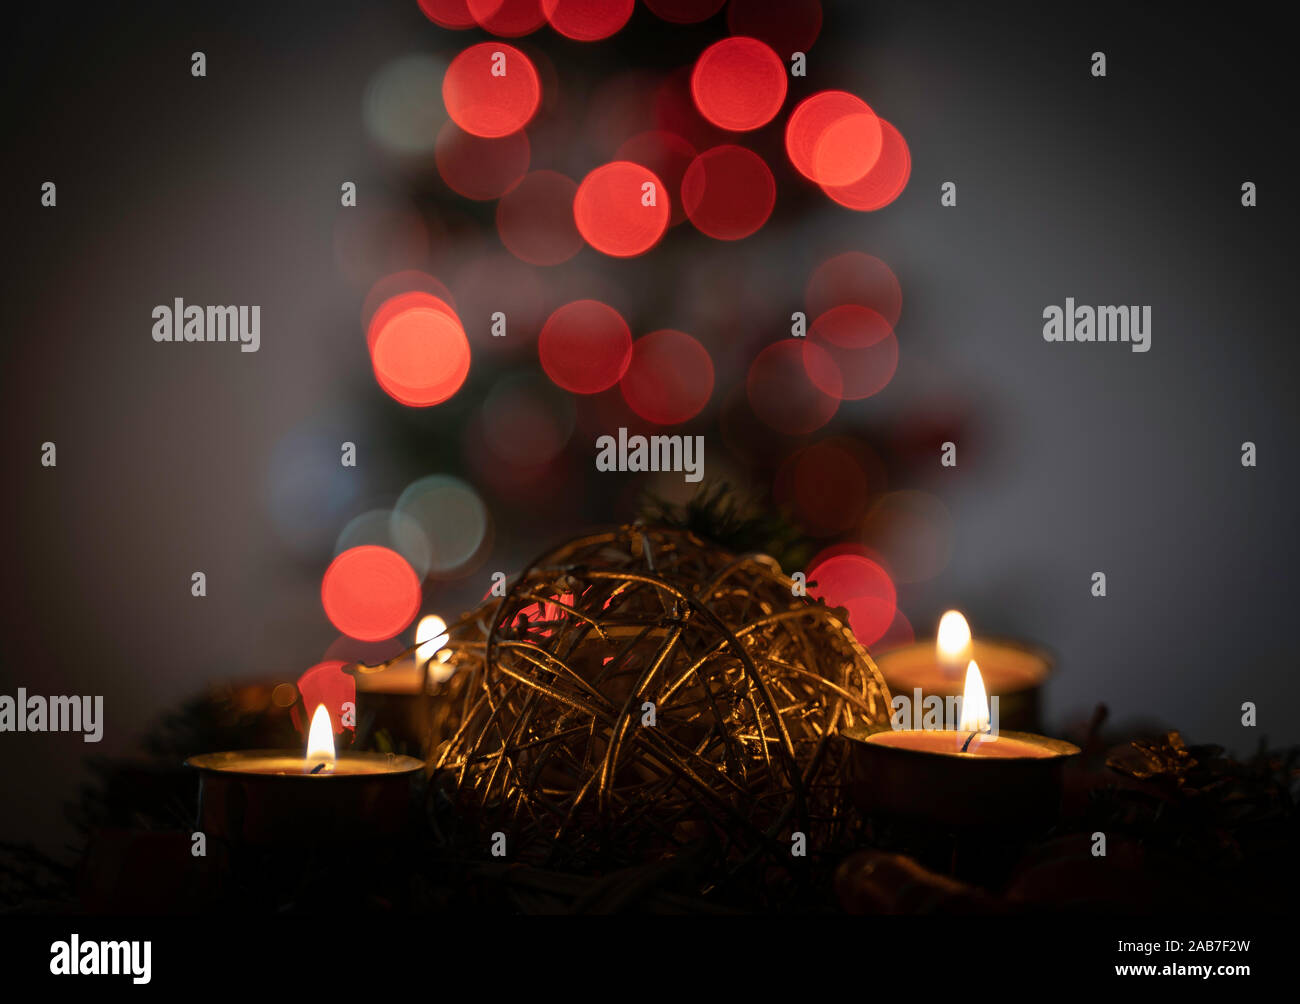 Advent or Christmas wreath with four burning candles. Close up image. Out of focus christmas tree in the background. Bokeh of christmas lights. Stock Photo